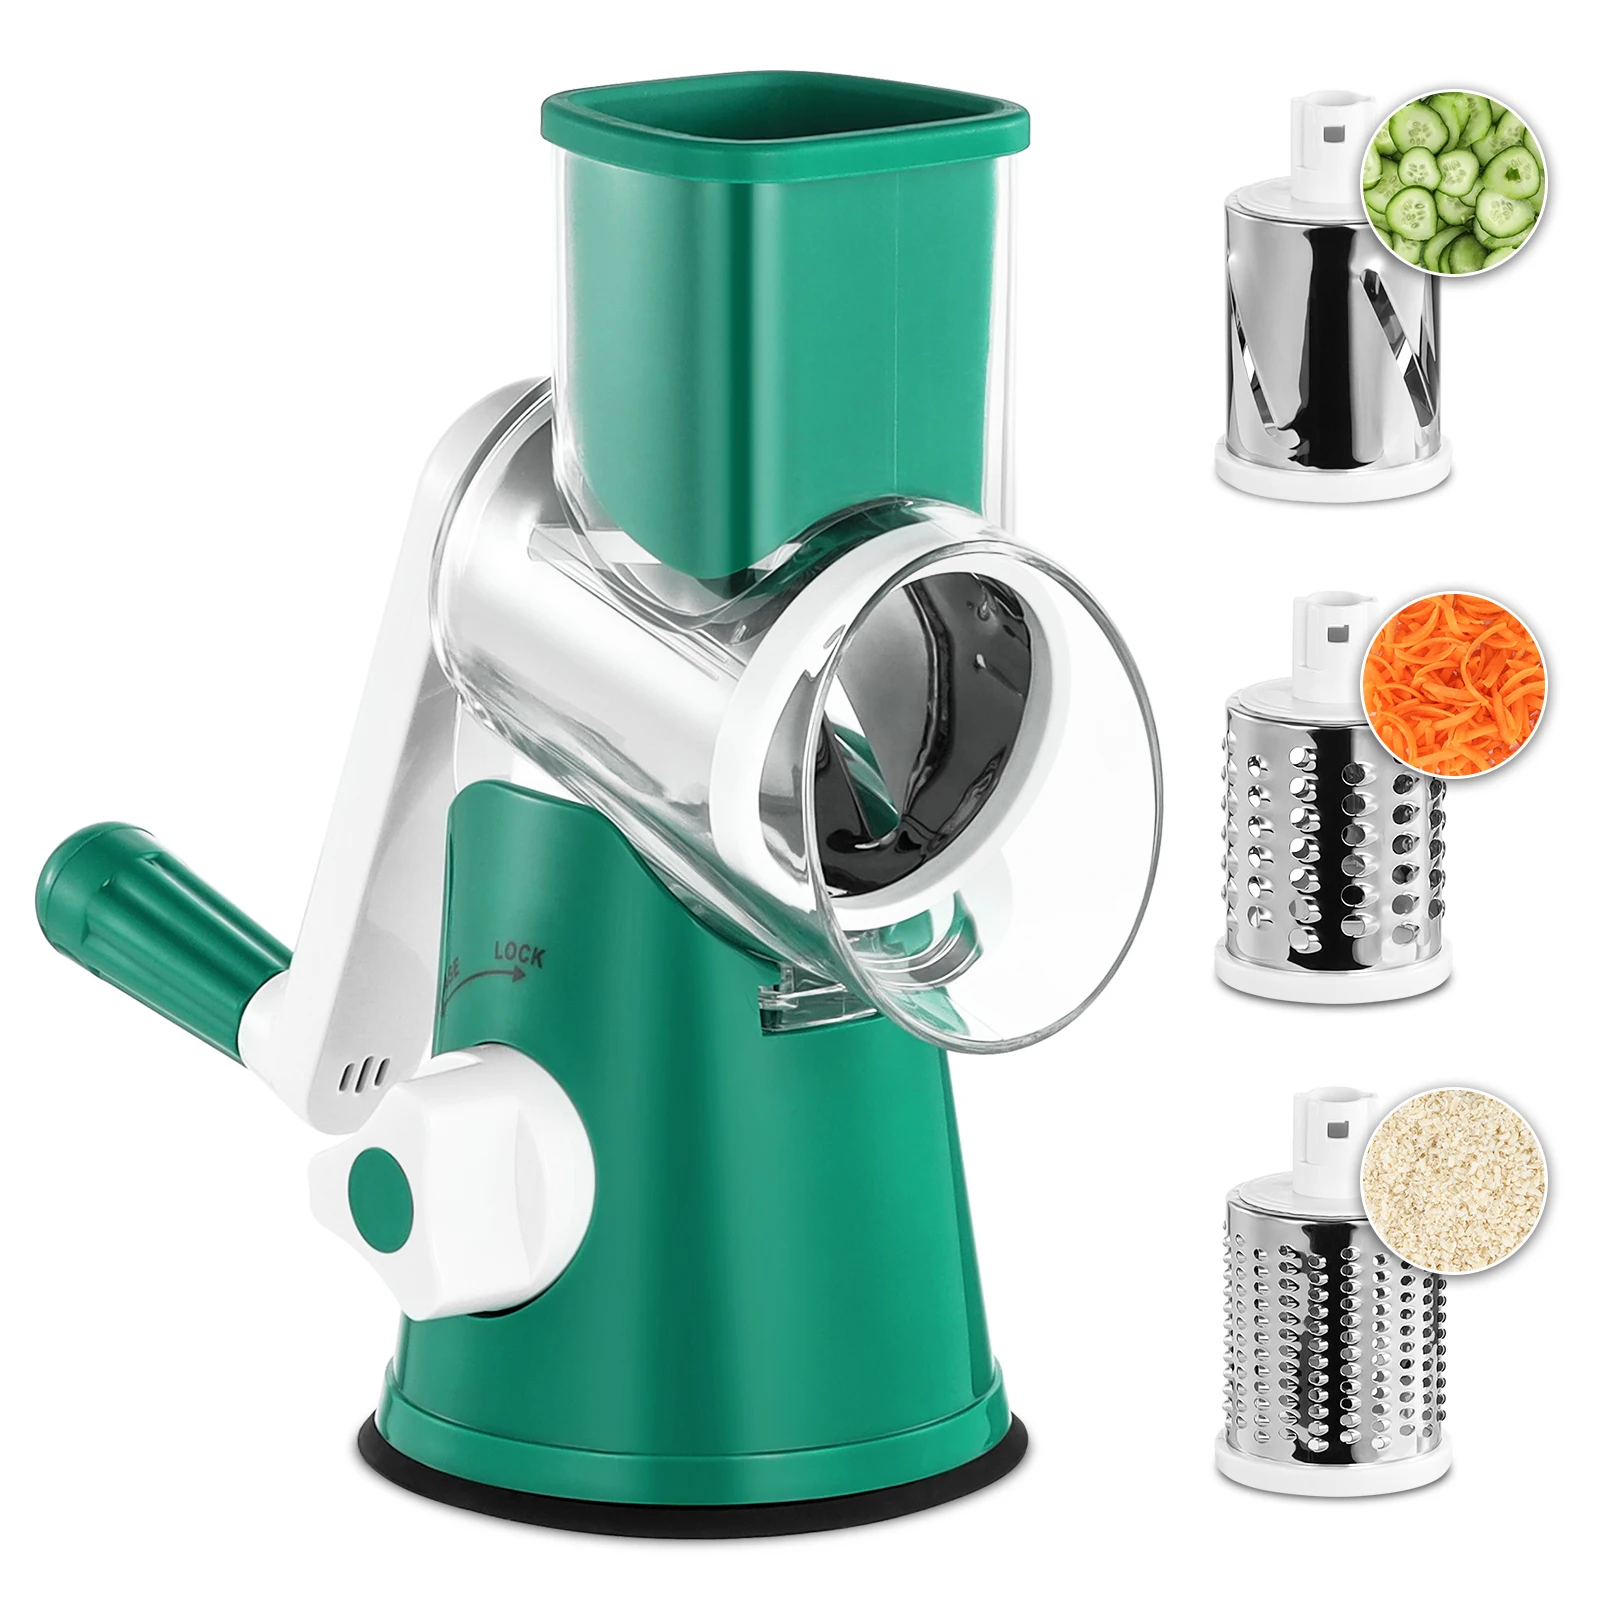 Tonma Multipurpose Rotary Cheese Grater with 1 Stainless Steel Handheld Drums for Parmesan, Mozzerella, Vegetables and More